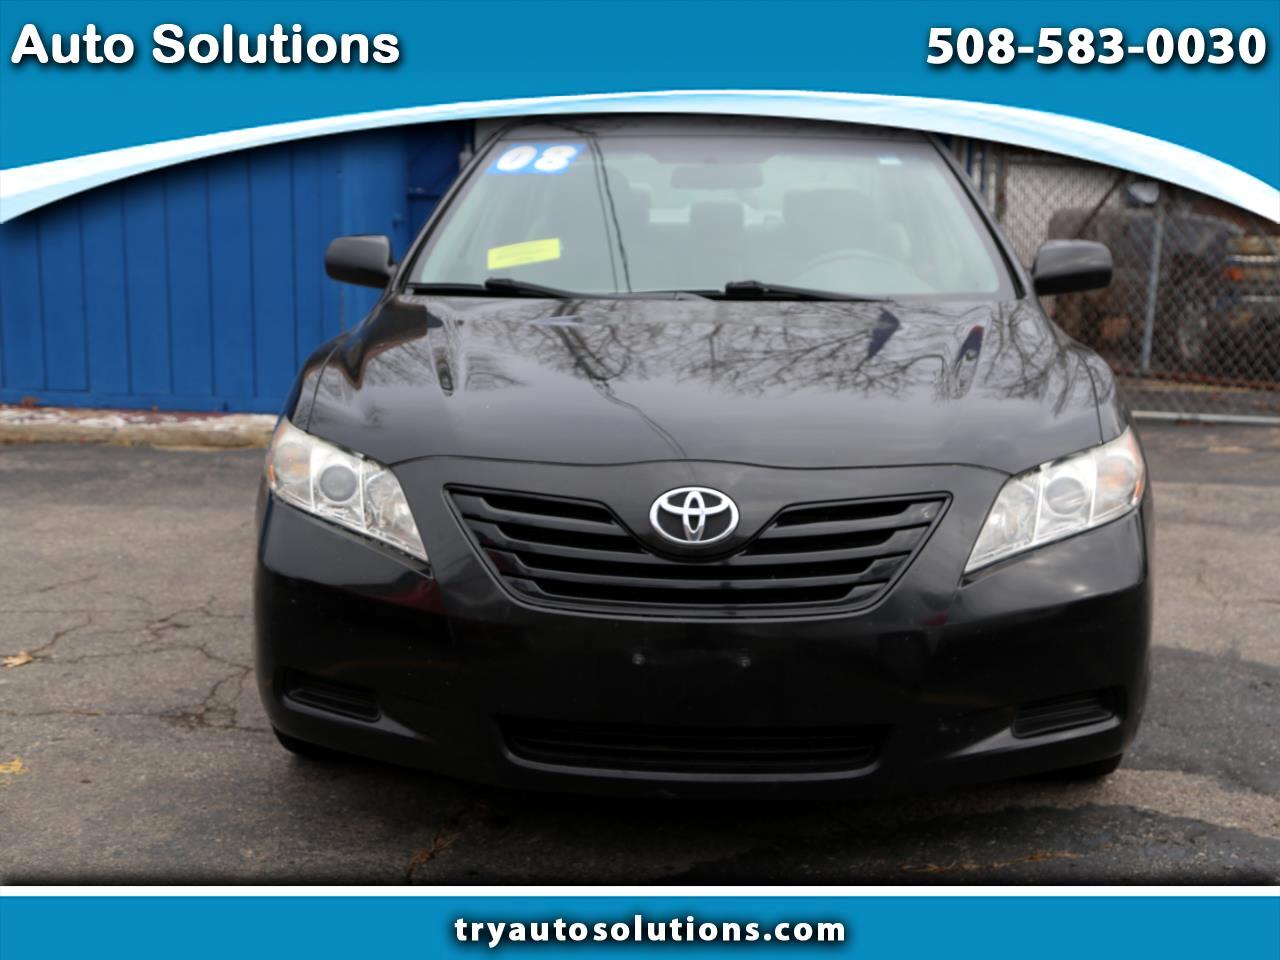 Toyota Camry 4dr Sdn I4 Man LE (Natl) 2008